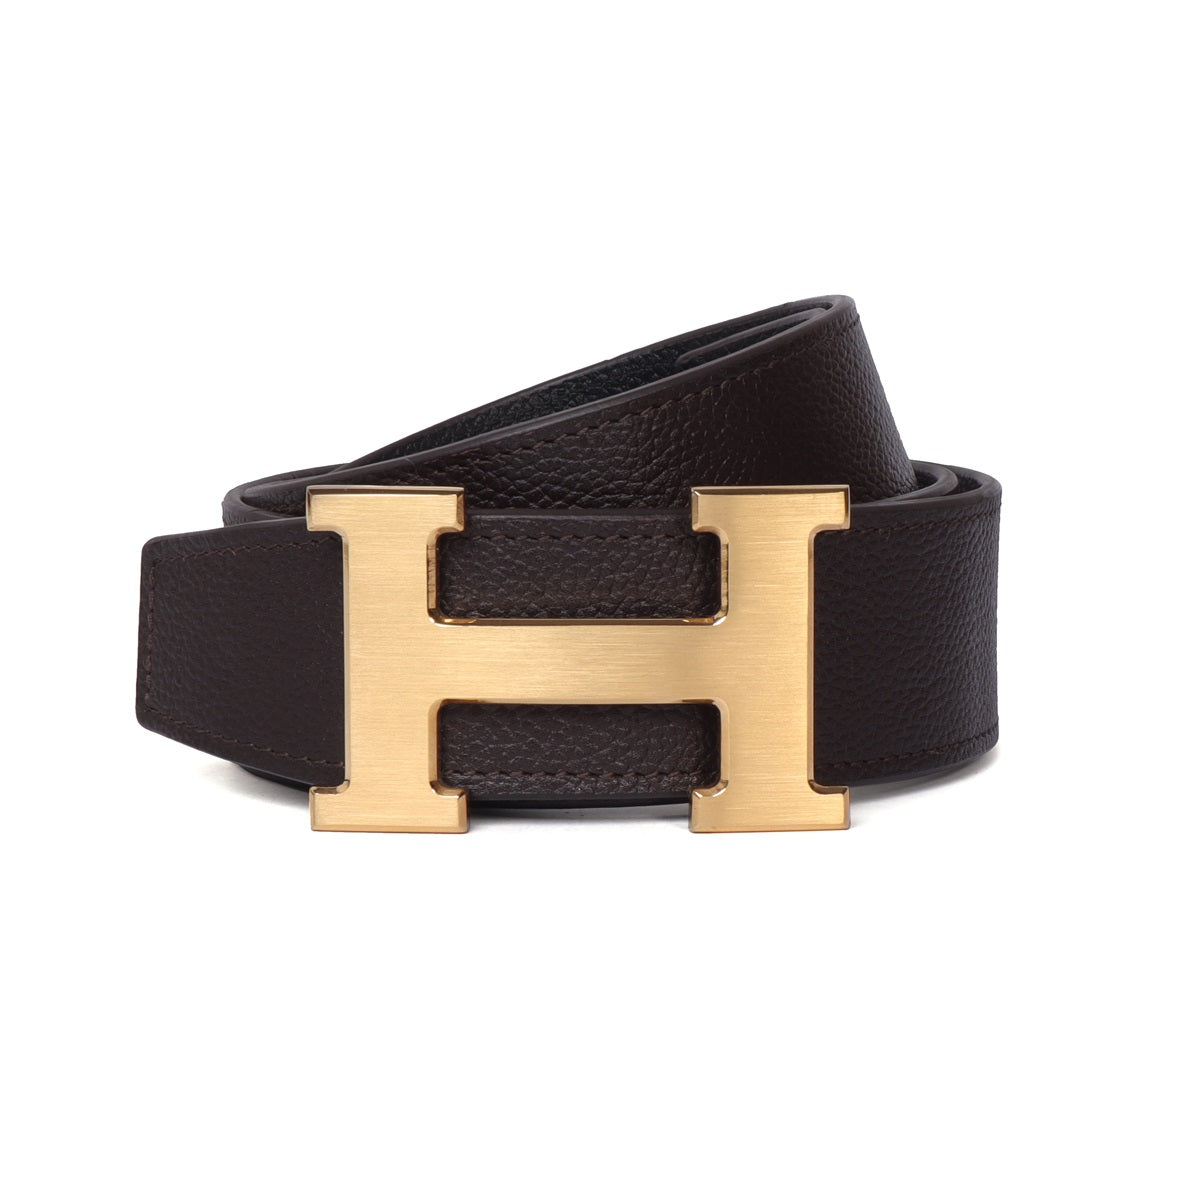 Your Buckle Our Belt-Crafted in Dark Brown Leather By Brune & Bareskin